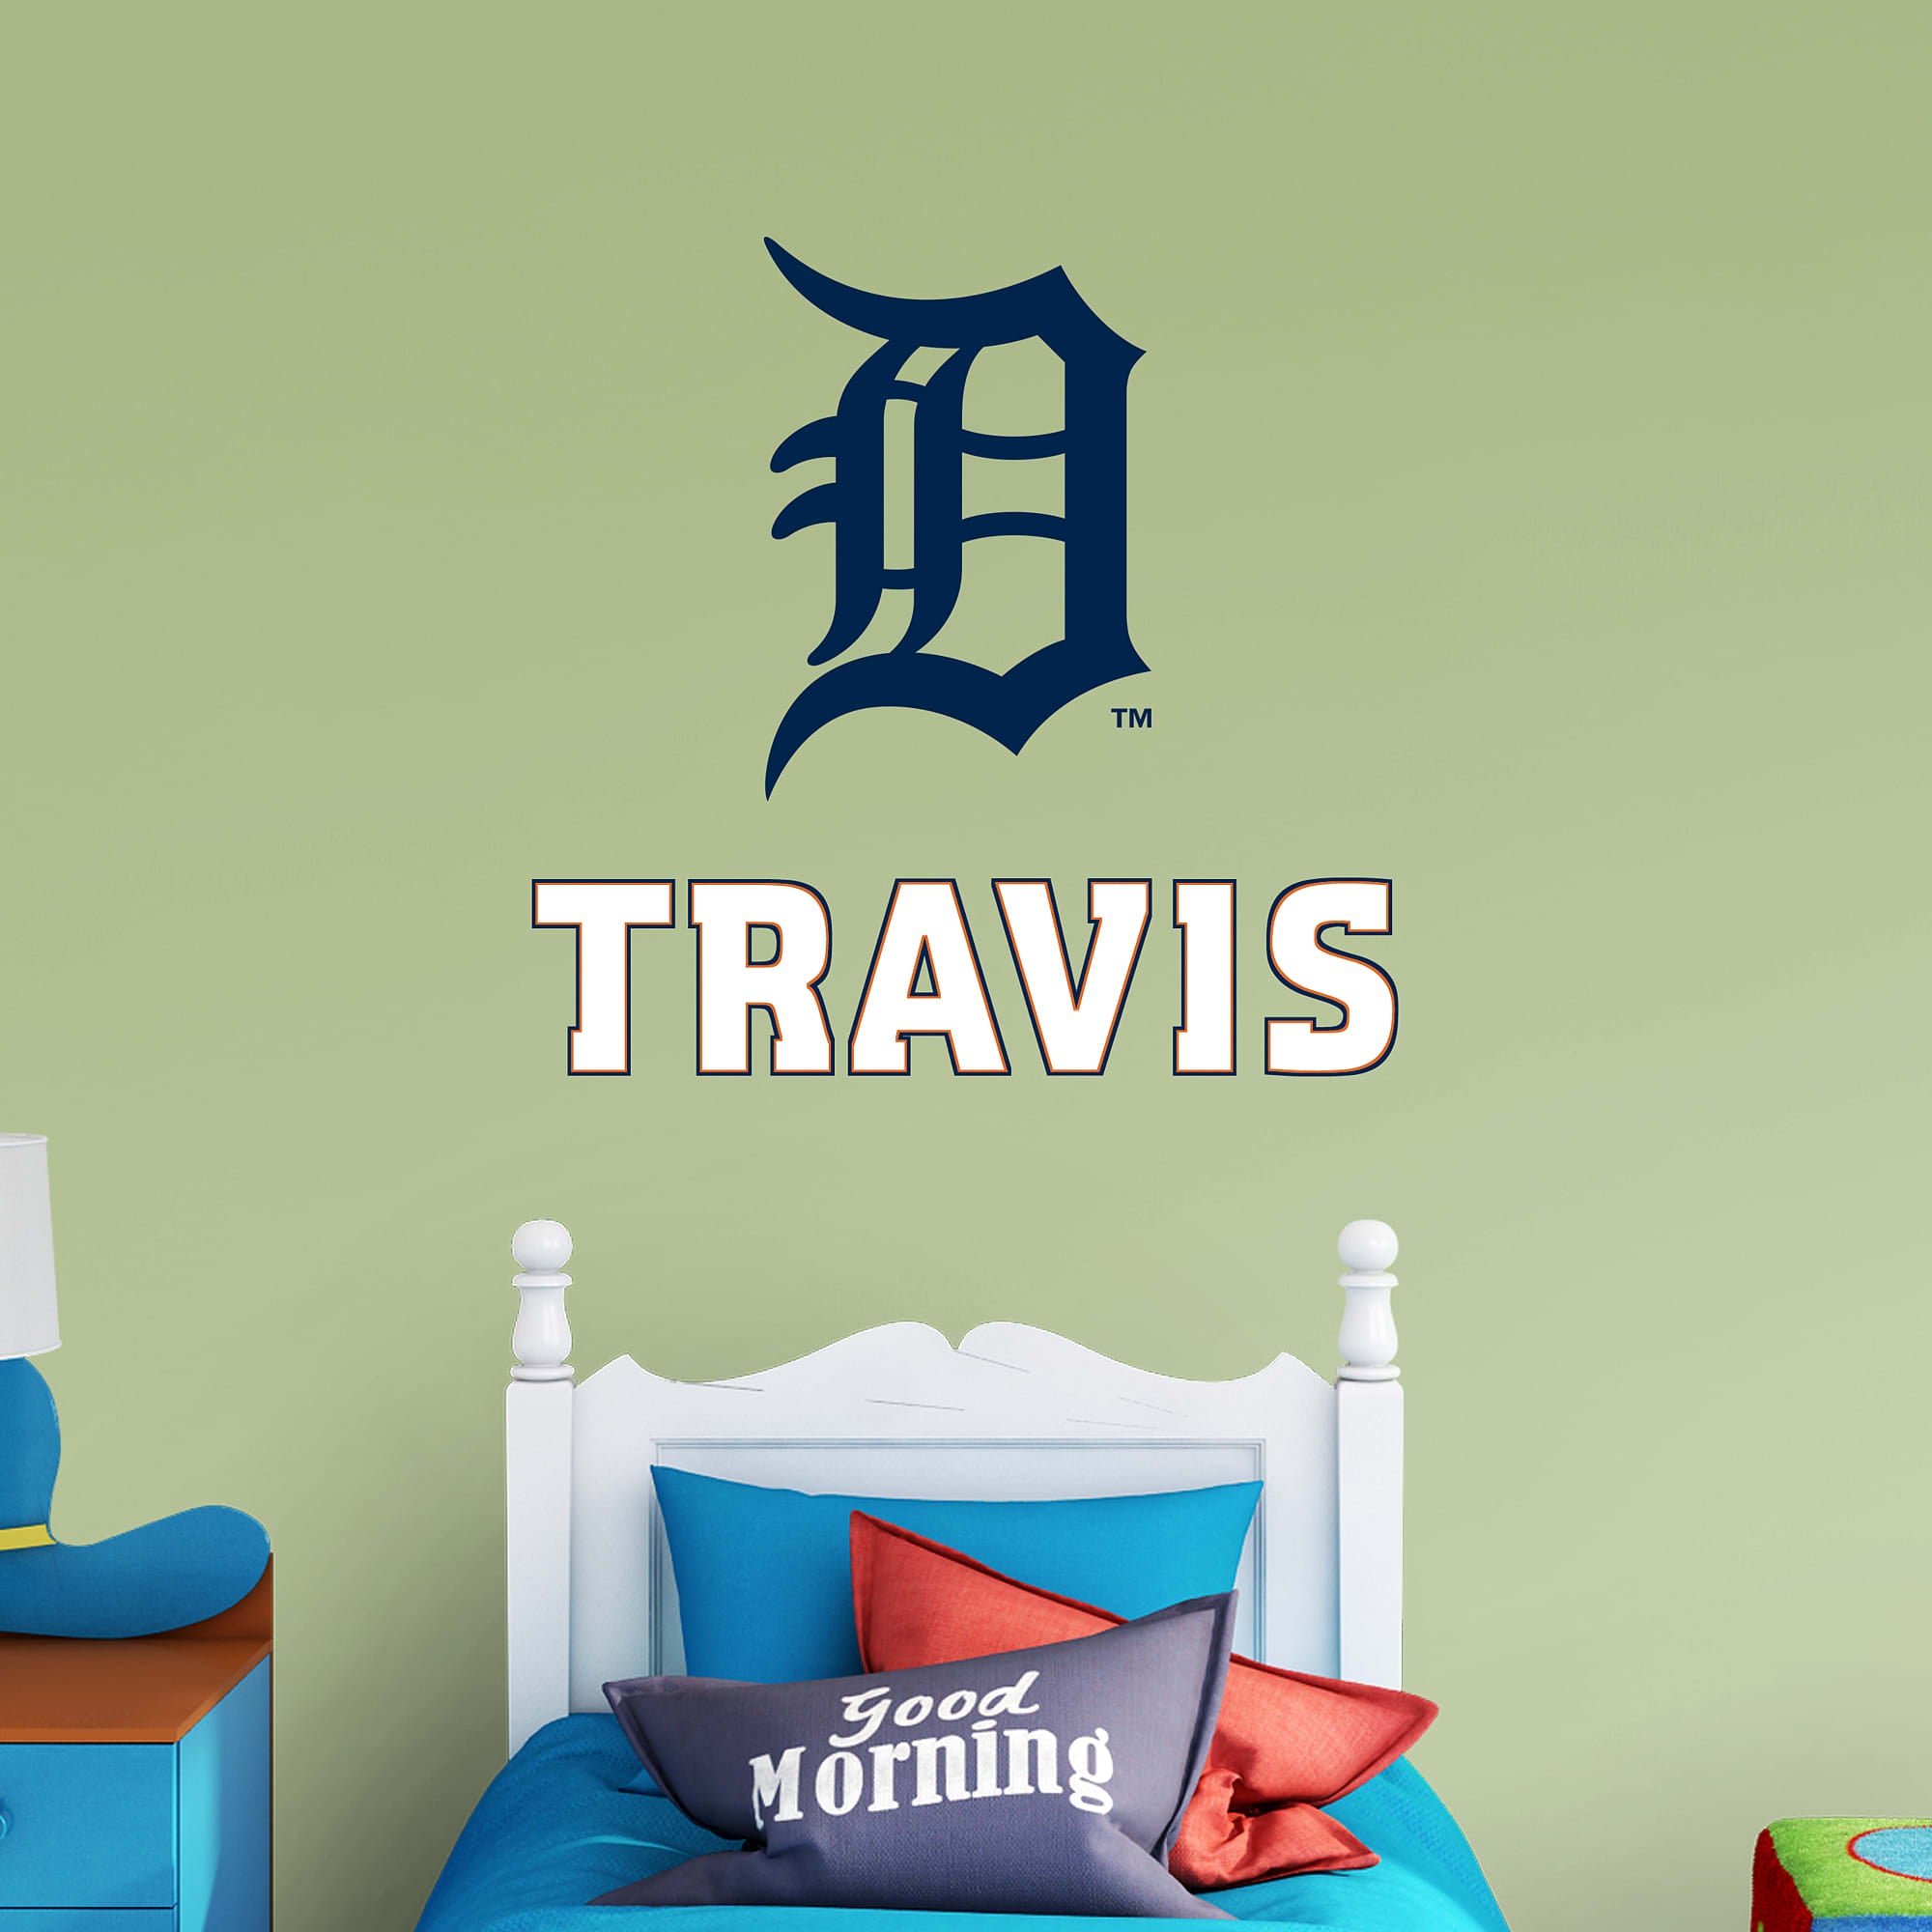 Detroit Tigers: Old English "D" Stacked Personalized Name - Officially Licensed MLB Transfer Decal in Navy/White (52"W x 39.5"H)